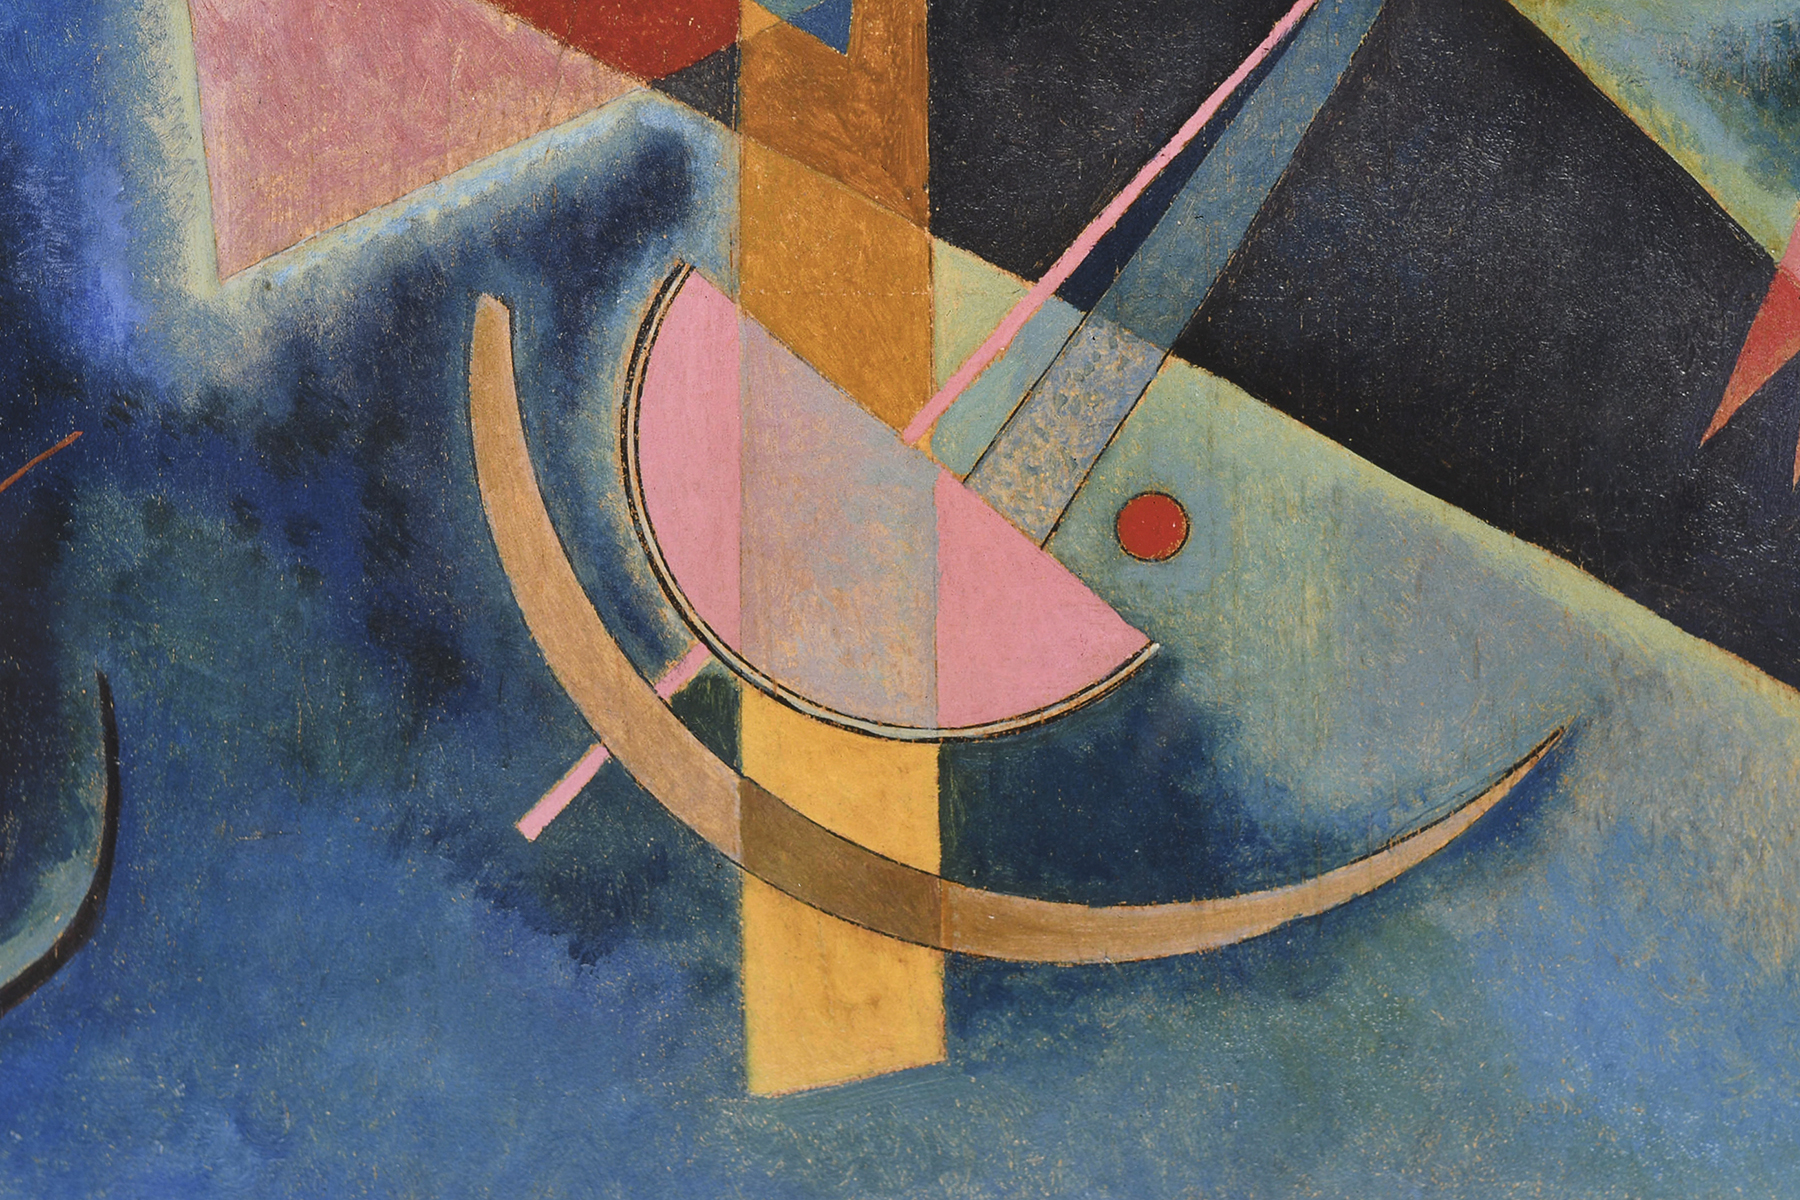 Kandinsky Limited Edition "In Blue, 1925" - Image 12 of 12